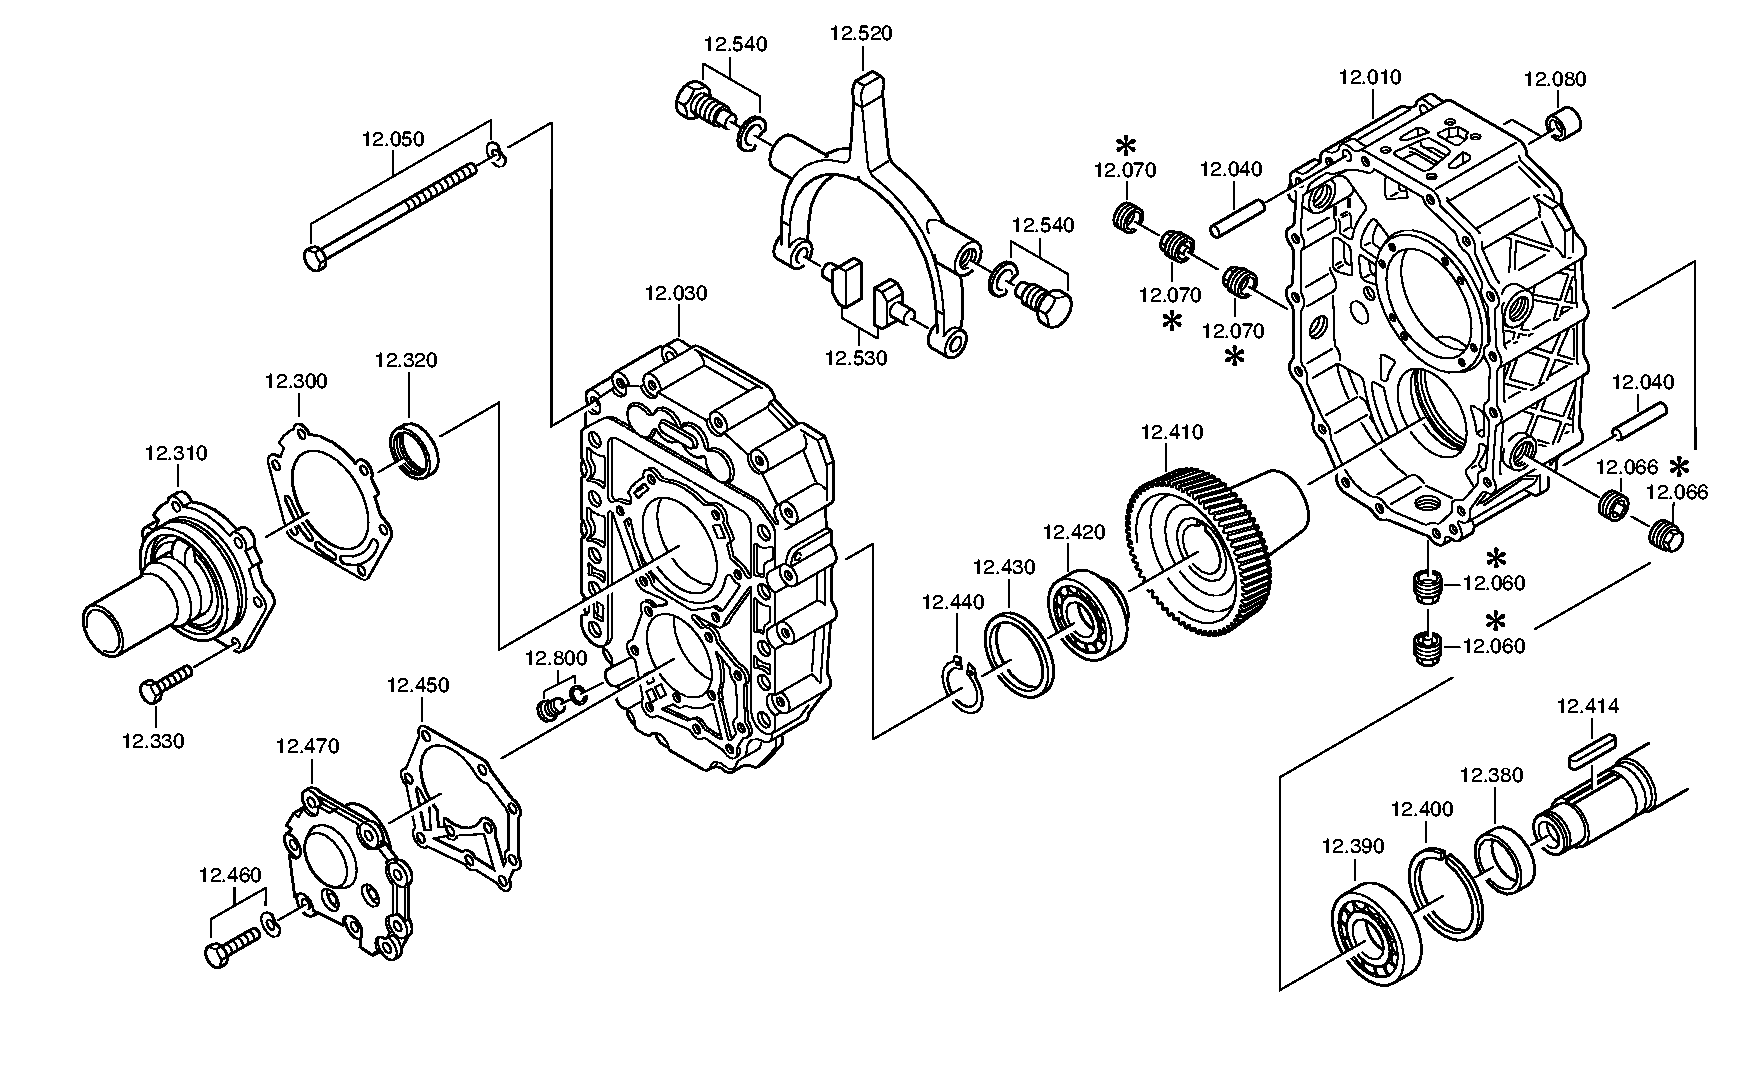 drawing for DAF 1897664 - 5/2 WAY VALVE (figure 1)